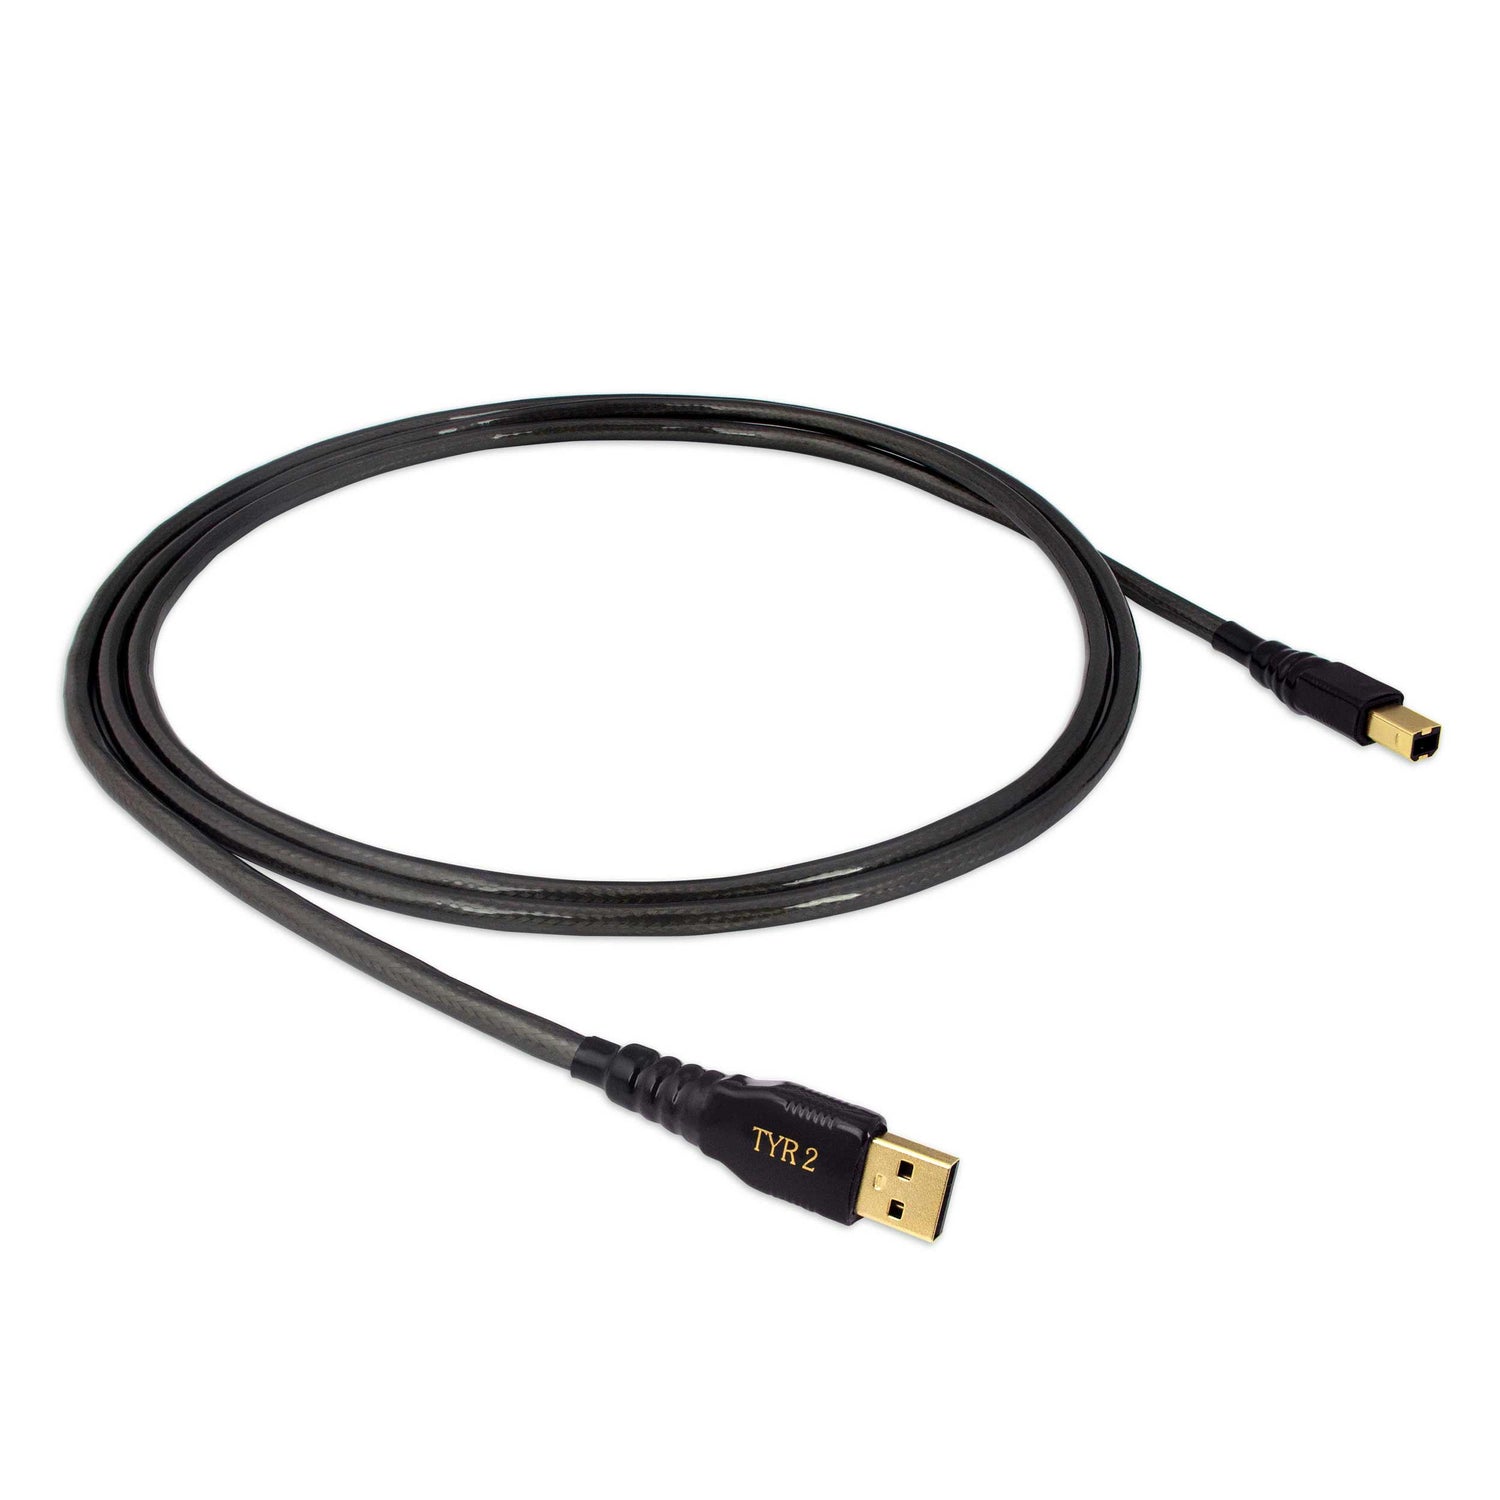 Tyr 2 USB Cable